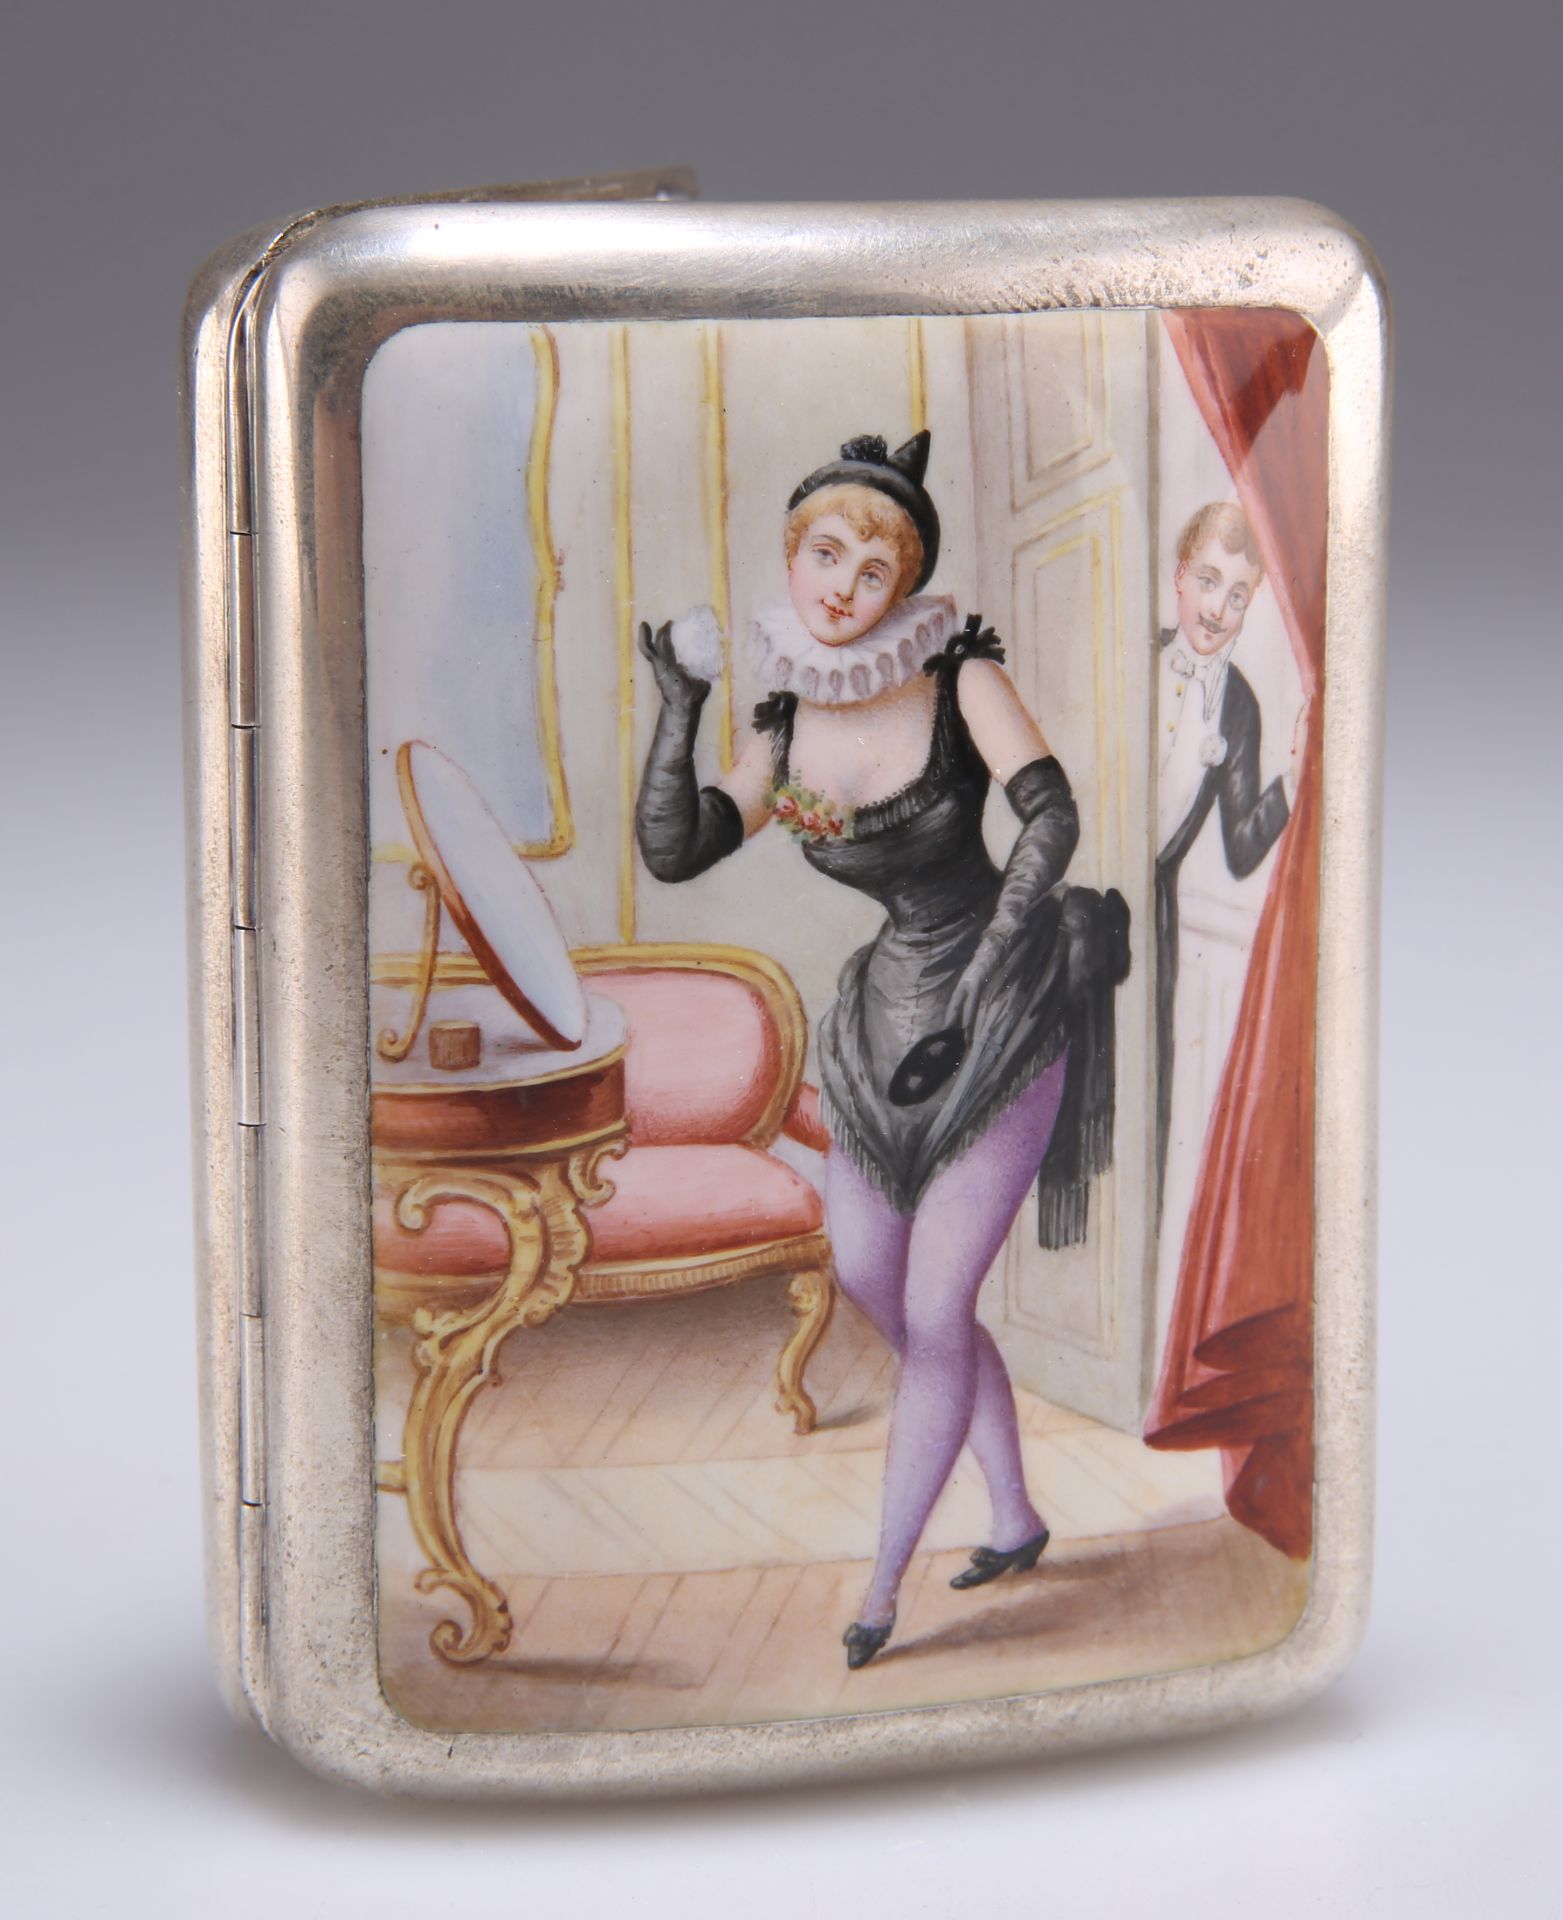 AN EARLY 20TH CENTURY CONTINENTAL SILVER AND ENAMEL CIGARETTE CASE